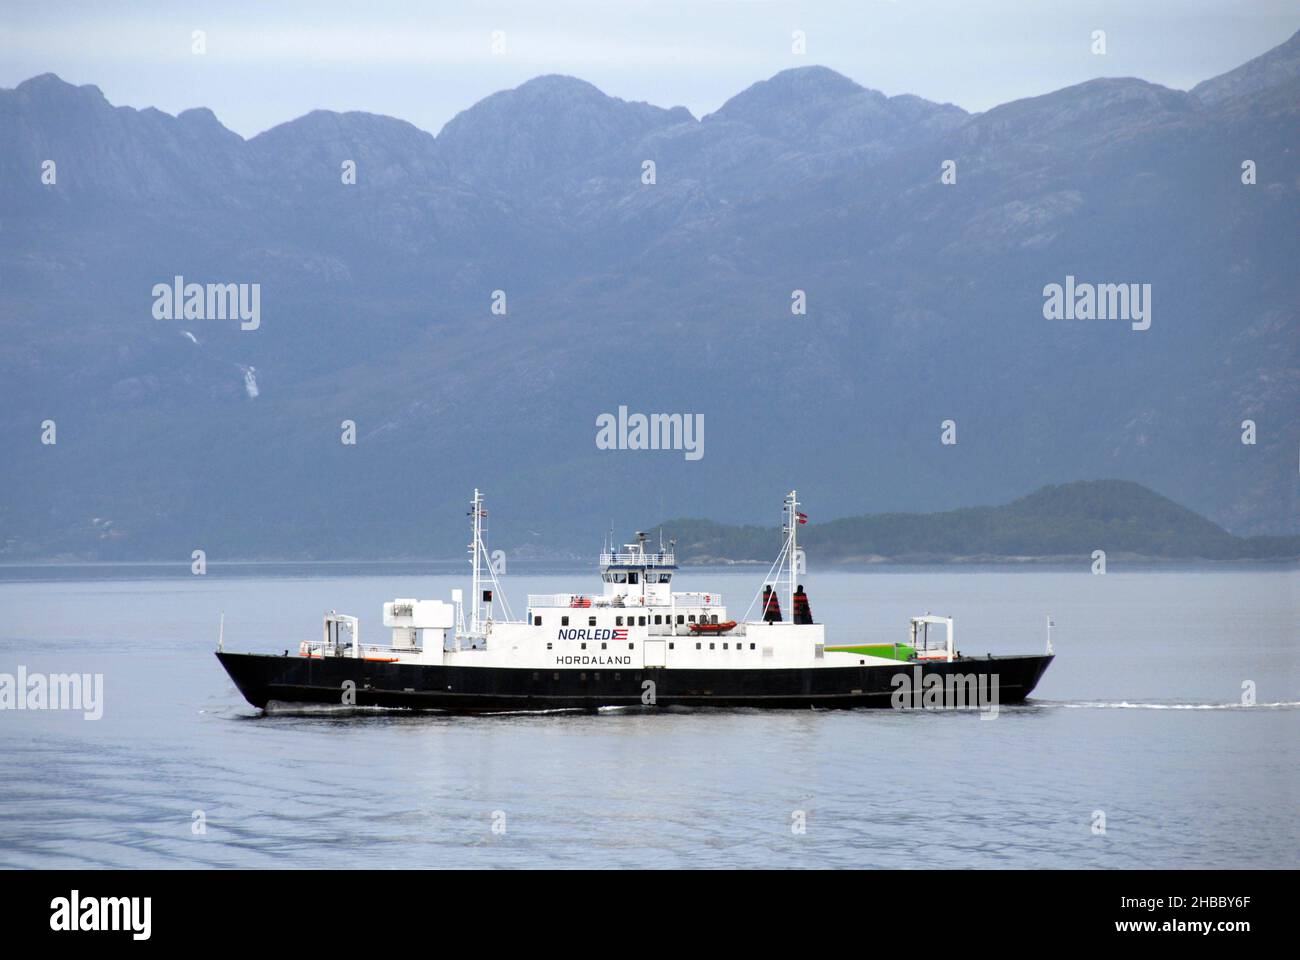 Norled Ro-Ro/passenger ship Norland, Norway, with mountains beyond Stock Photo